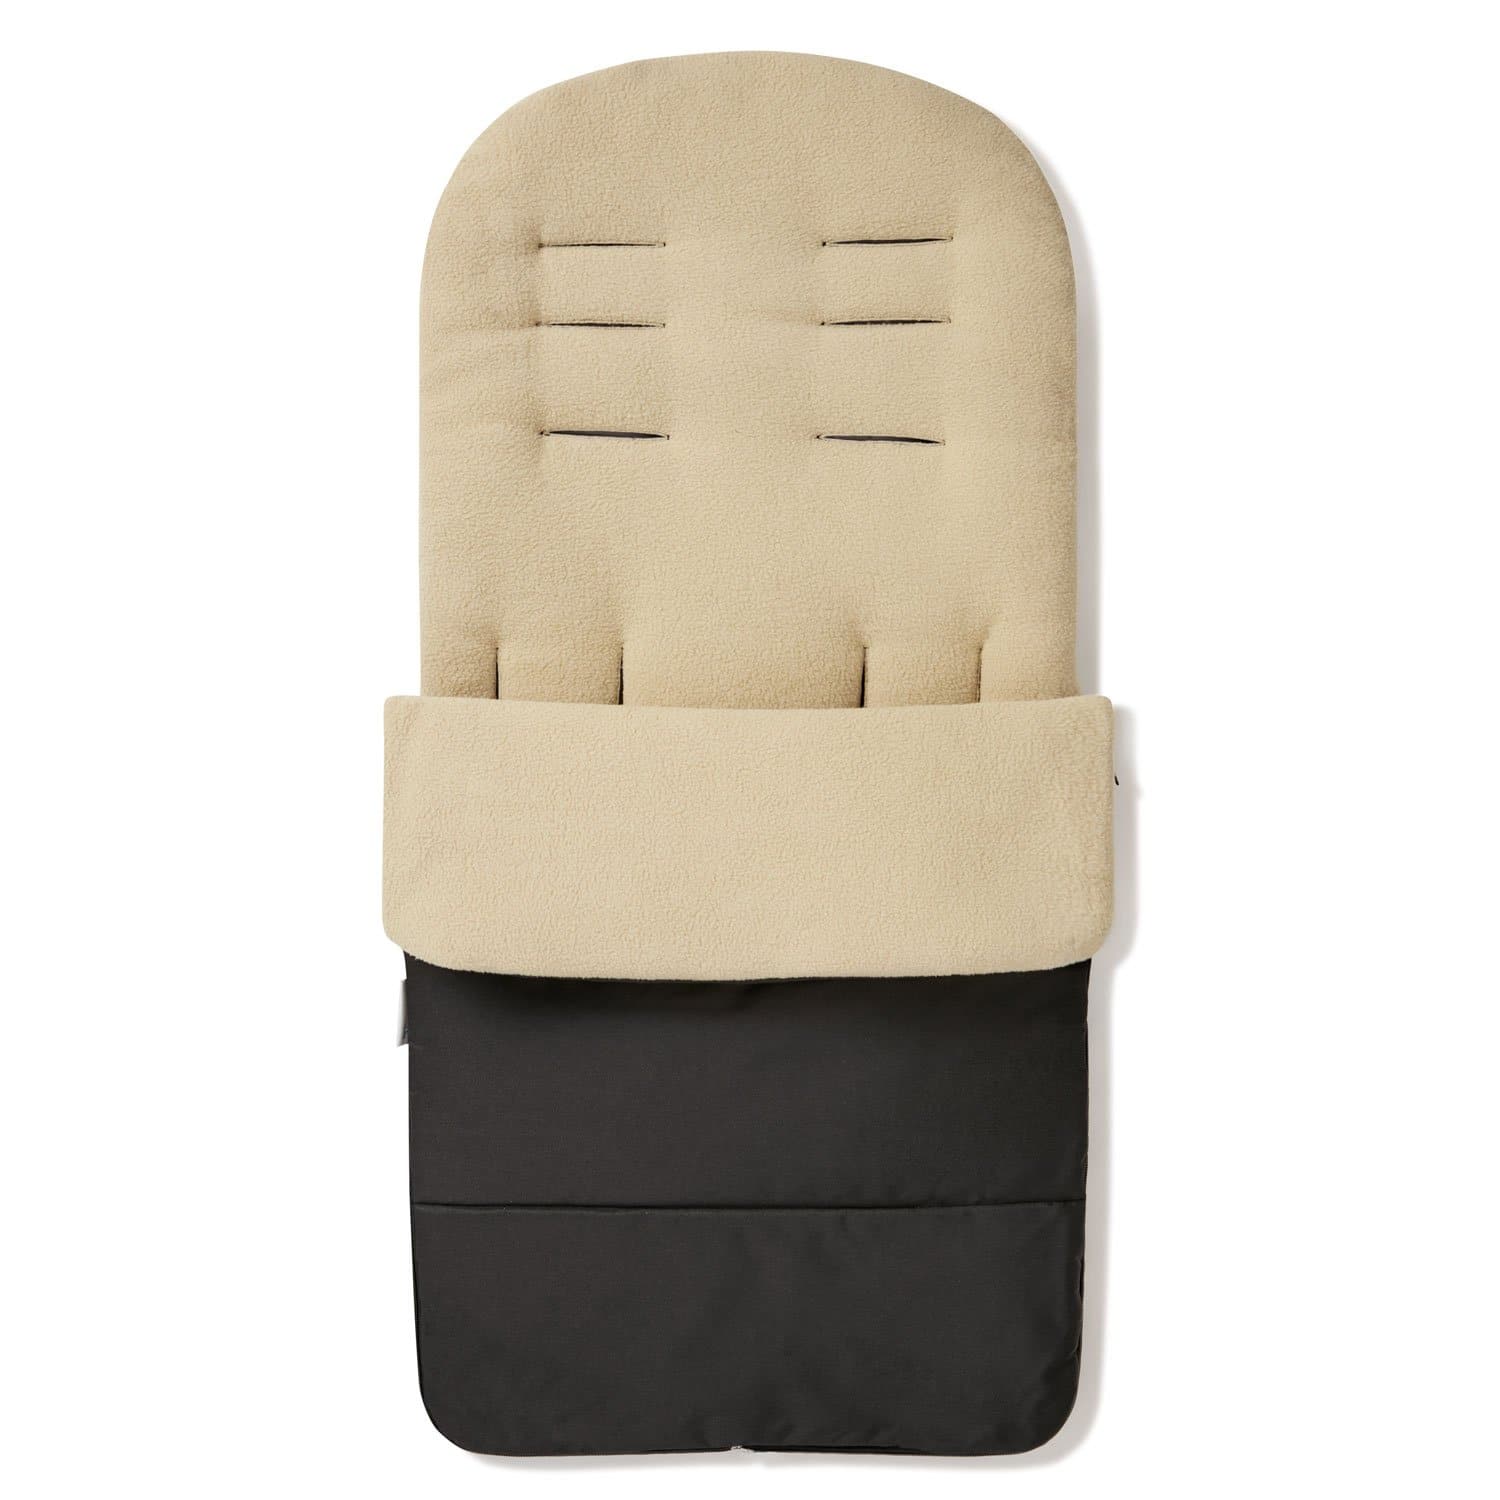 Premium Footmuff / Cosy Toes Compatible with Bumbleride - Desert Sand / Fits All Models | For Your Little One